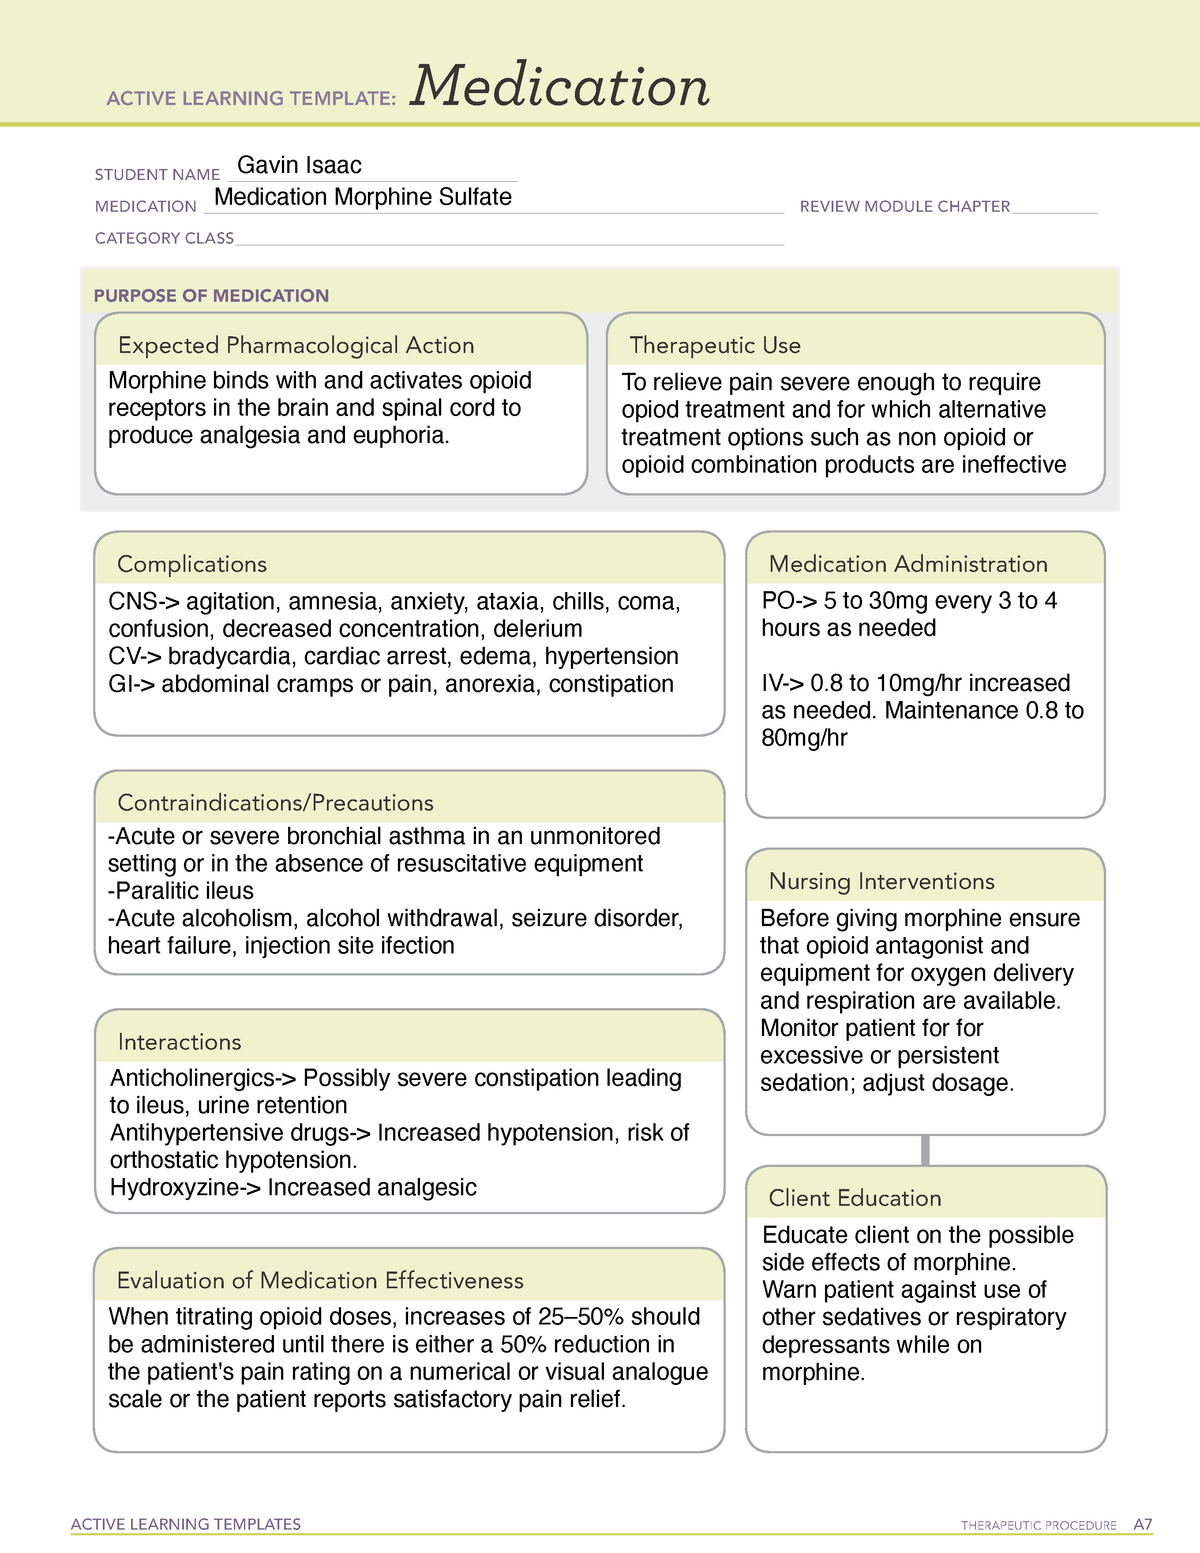 medication-morphine-active-learning-template-active-learning-templates-therapeutic-procedure